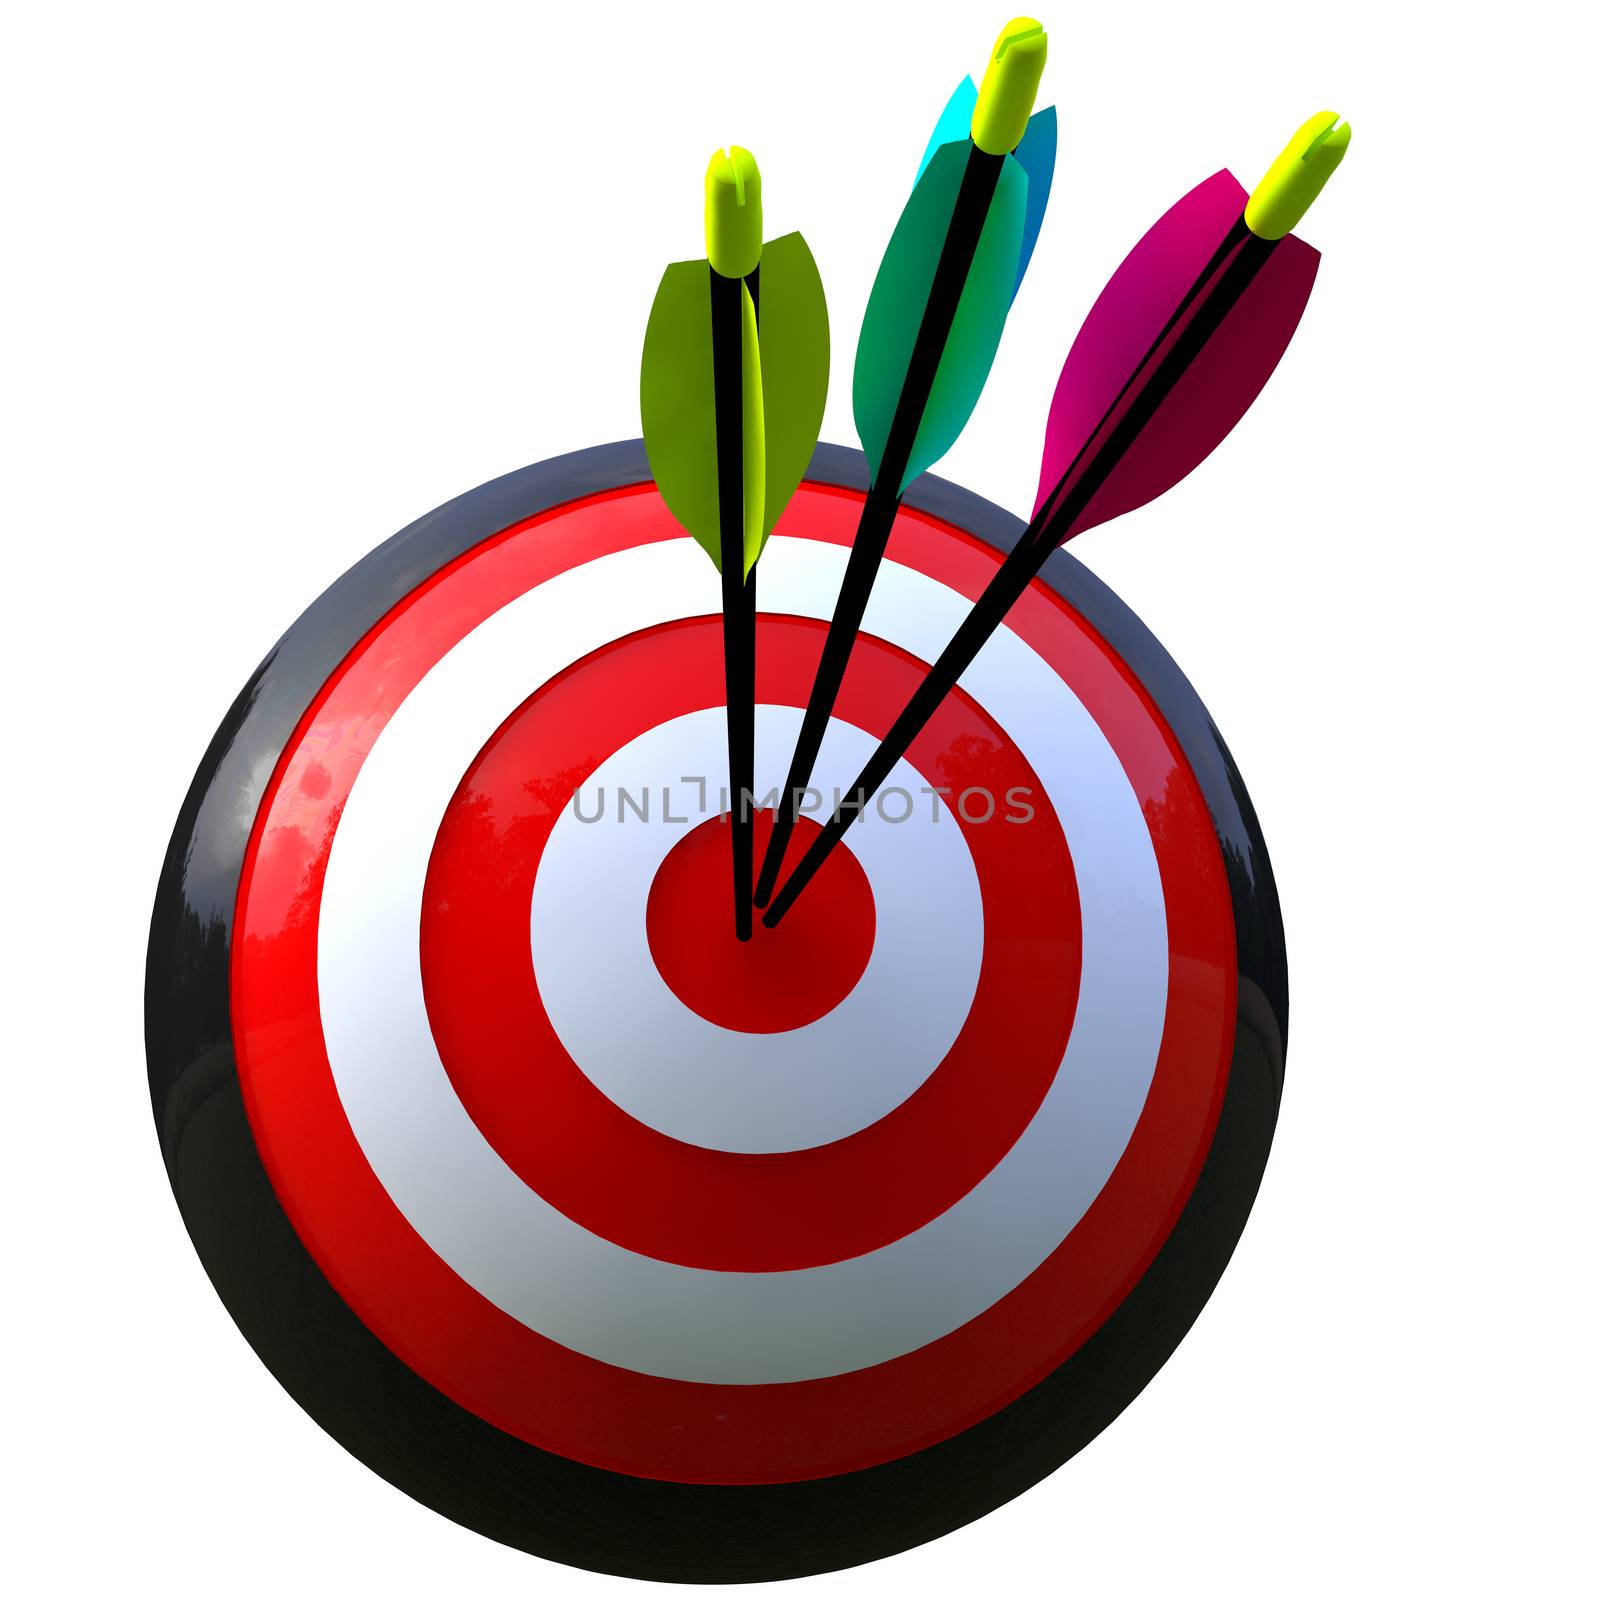 3D simulation of a ball target and three arrows in the center isolated and with clipping path